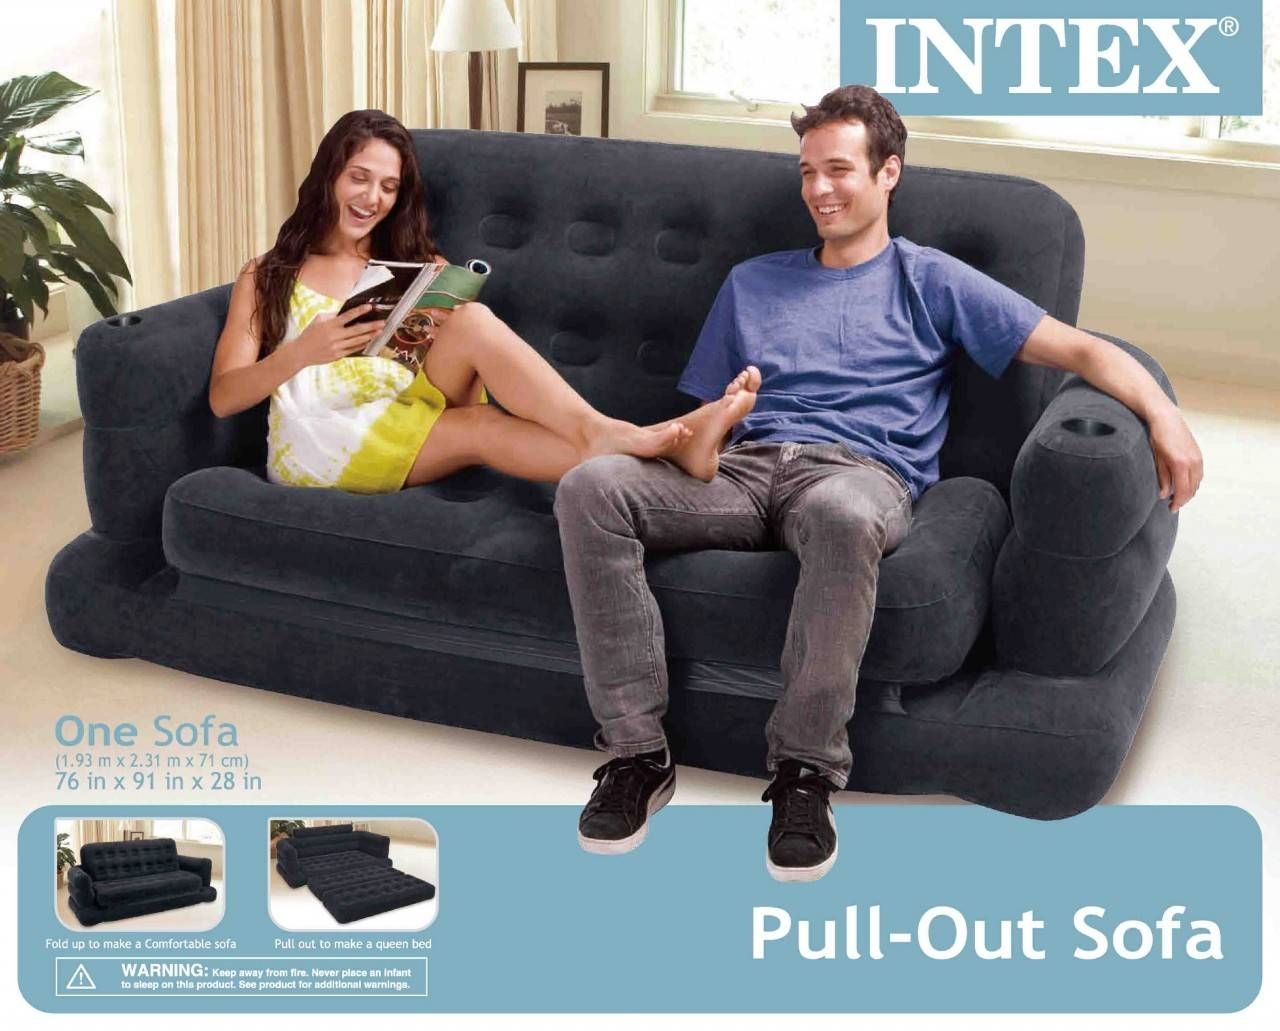 Intex Inflatable Pull Out Sofa And Queen Air Mattress Pertaining To Intex Sleep Sofas (View 9 of 15)